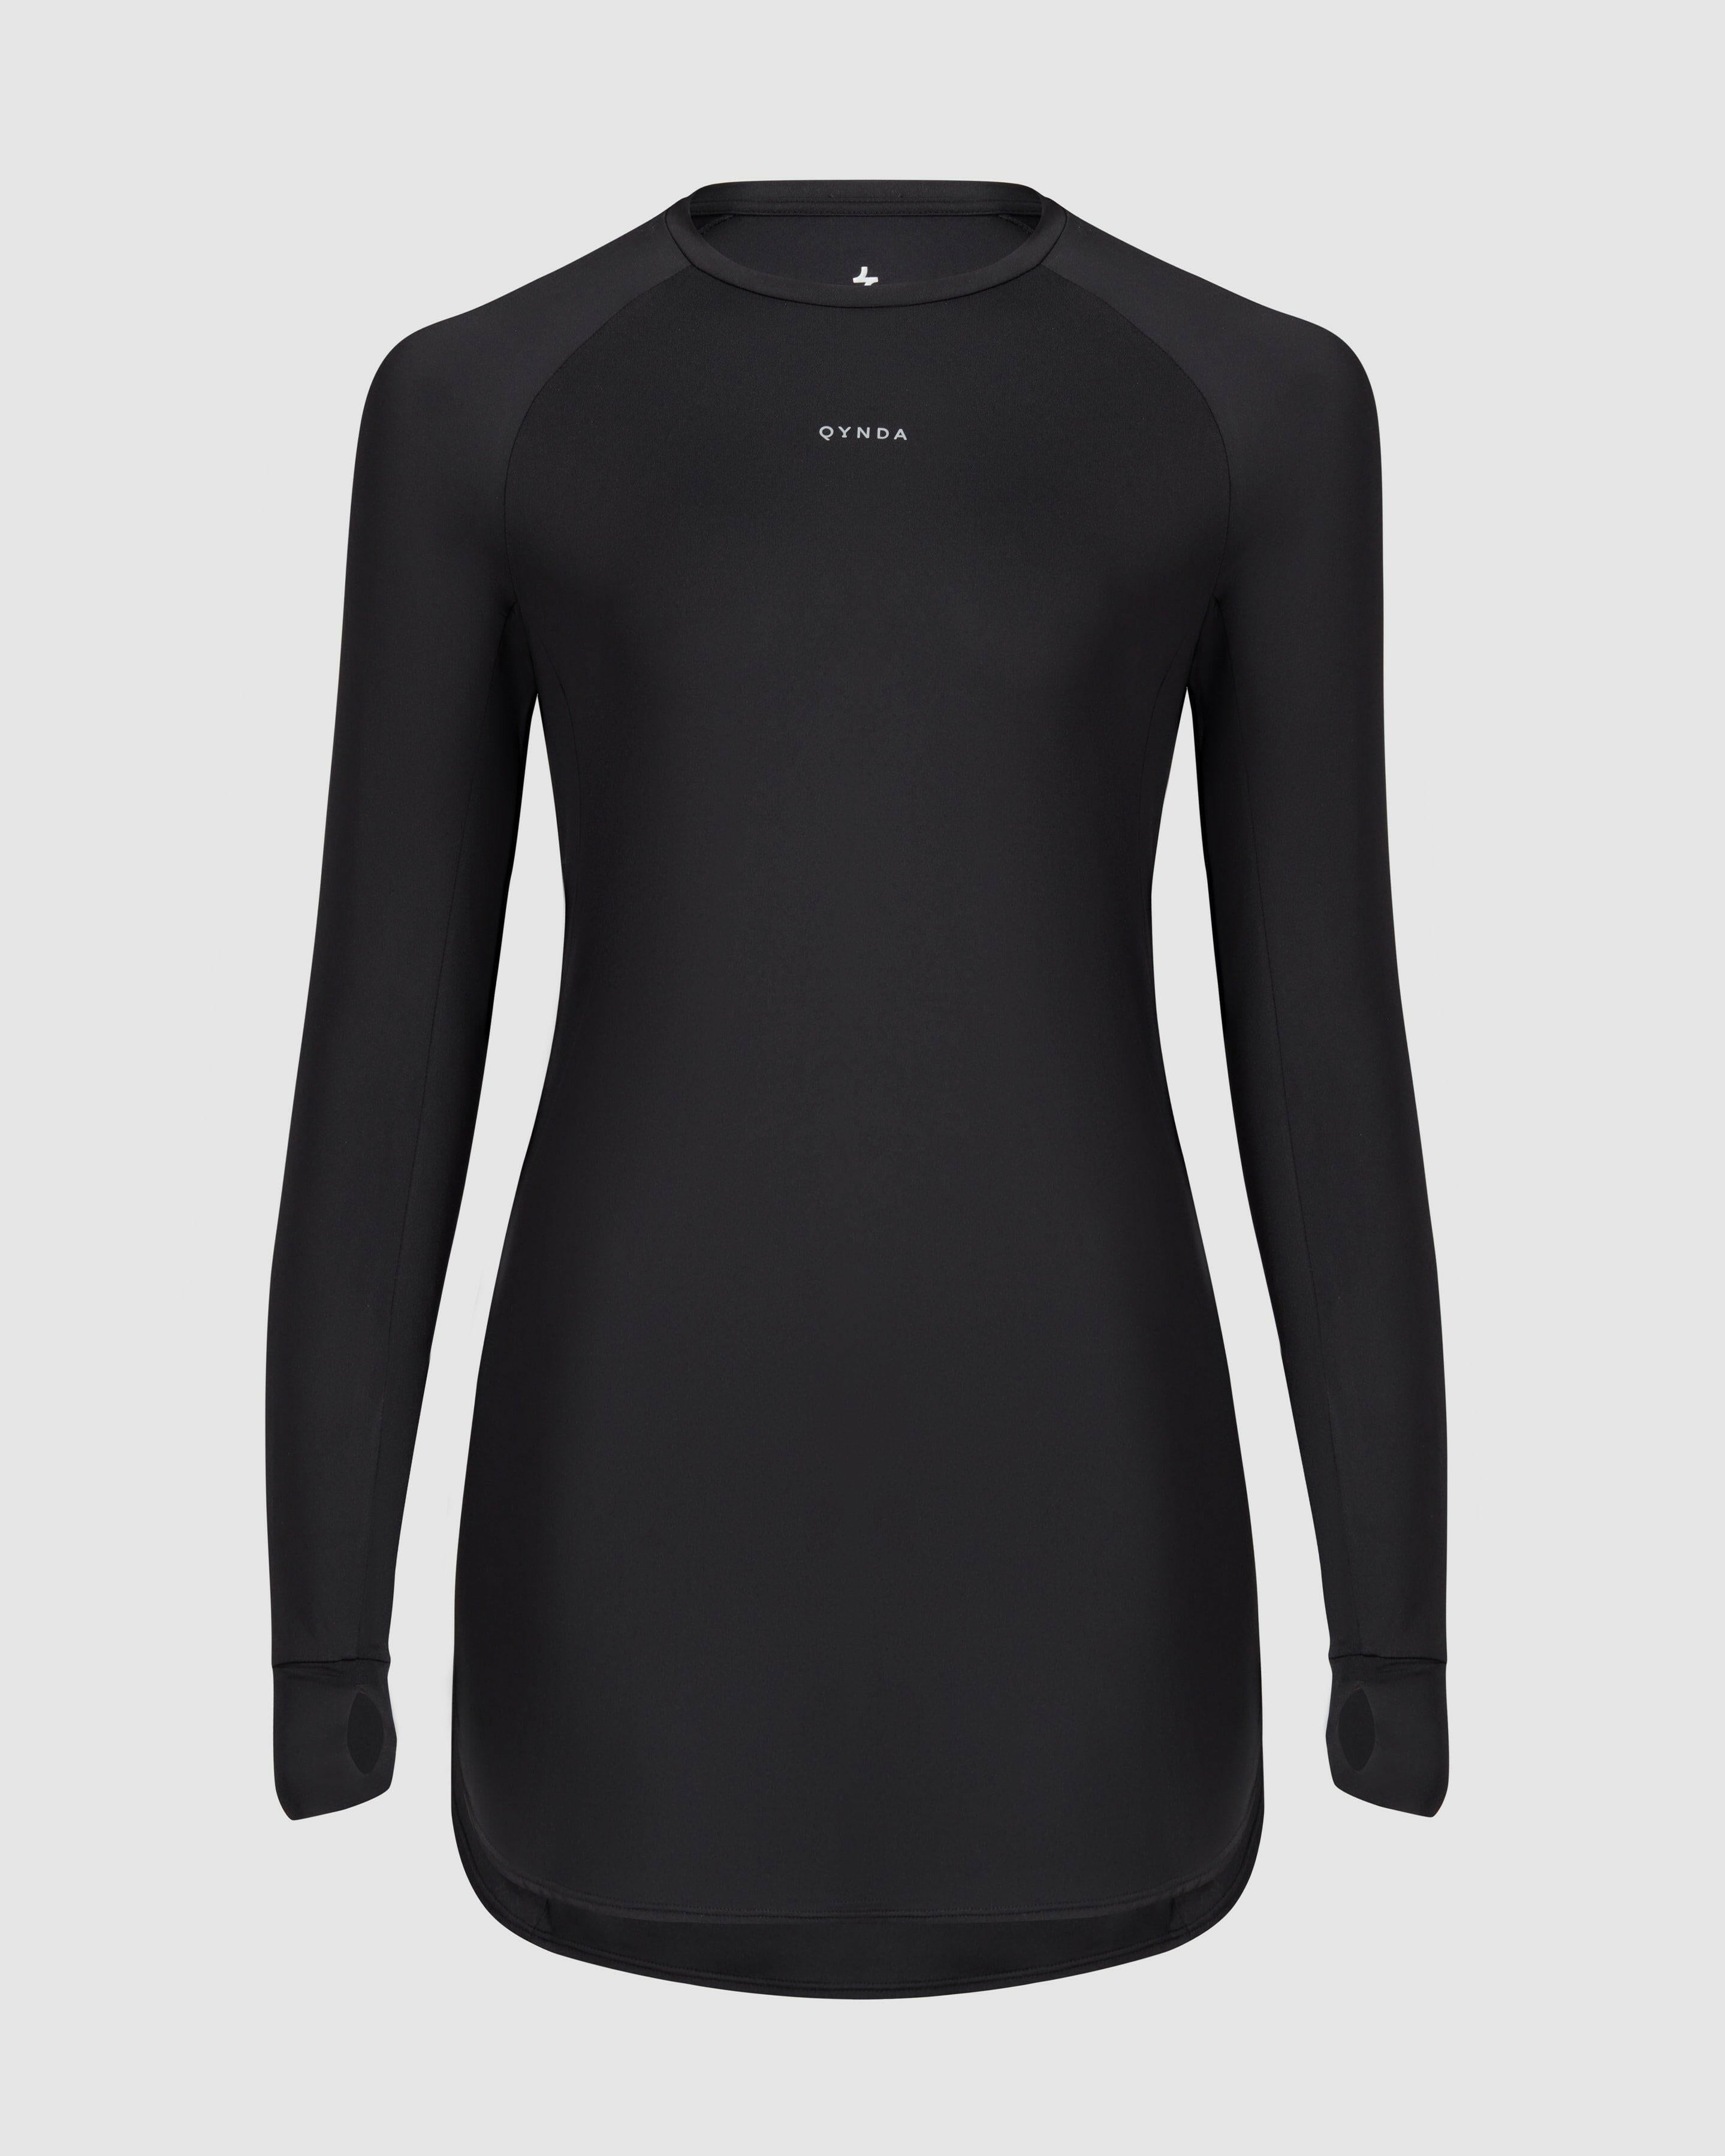 A, modest Black MOD LONG SLEEVE T-SHIRT by Qynda with a fitted design, prominently displaying a small Qynda logo on the chest. 